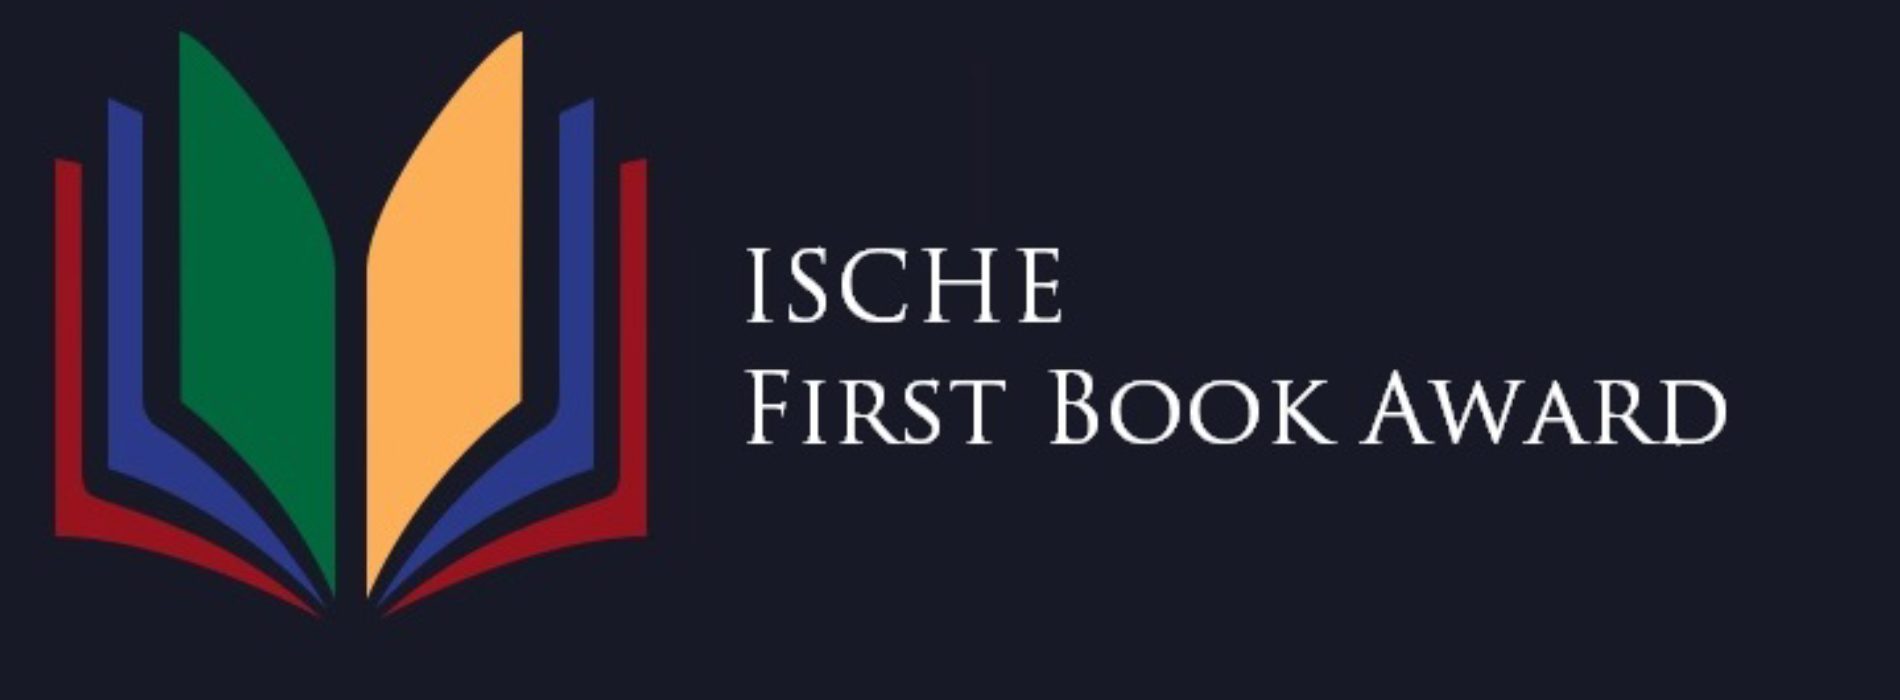 Request for submissions: 2018 ISCHE First Book Award (Deadline: Sep. 5, 2017)